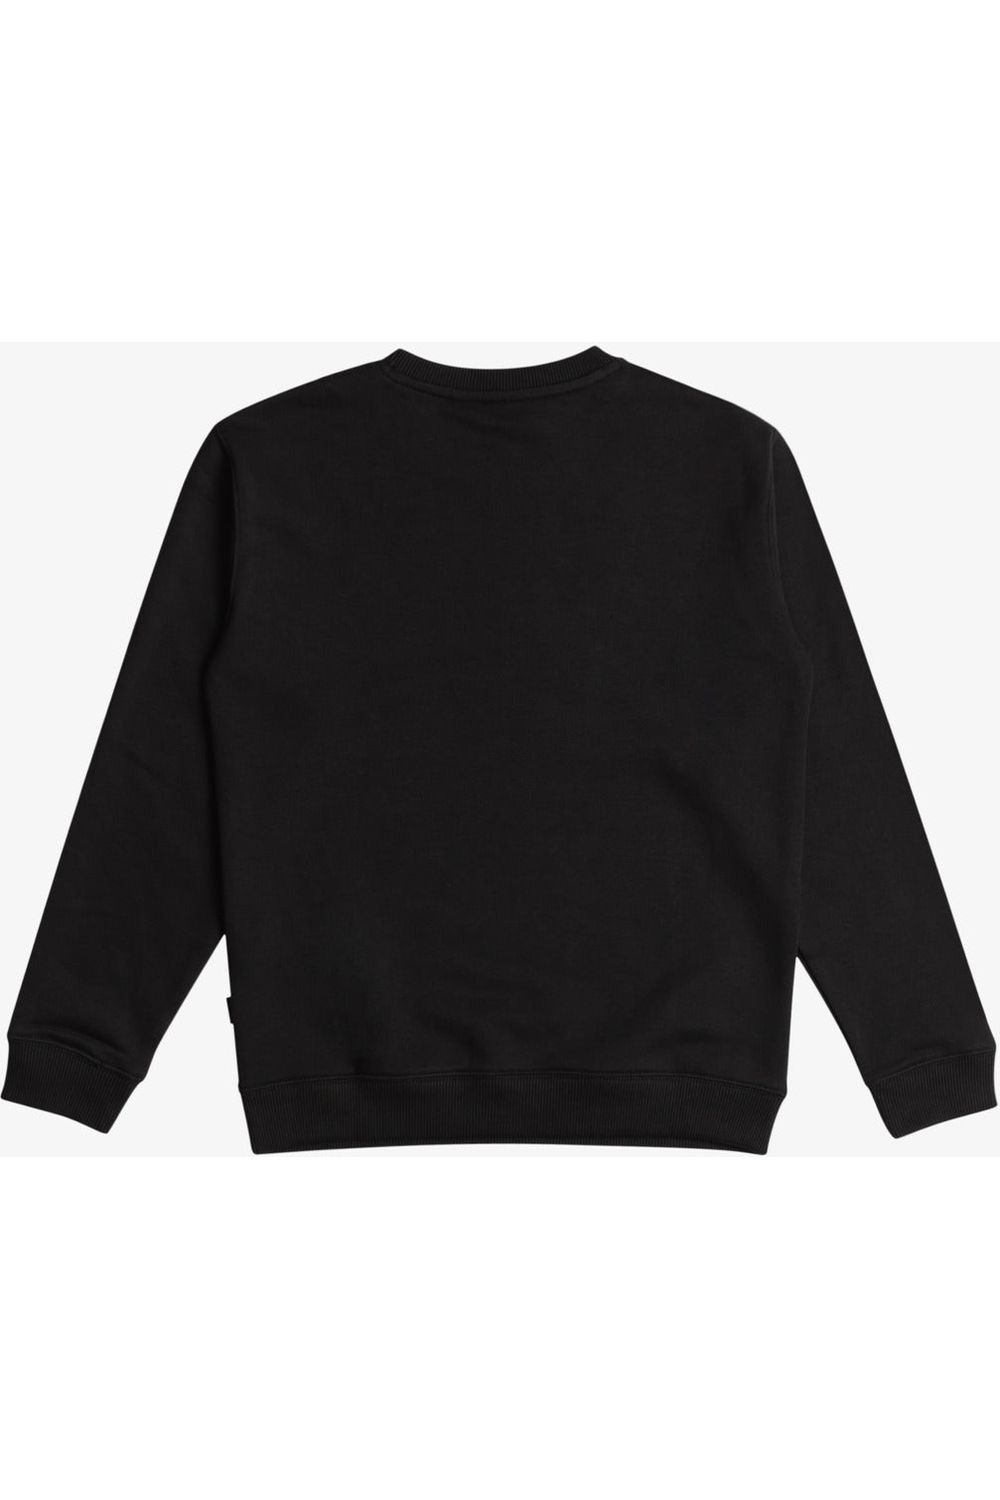 Quiksilver Graphic Crew Youth Sweat Black